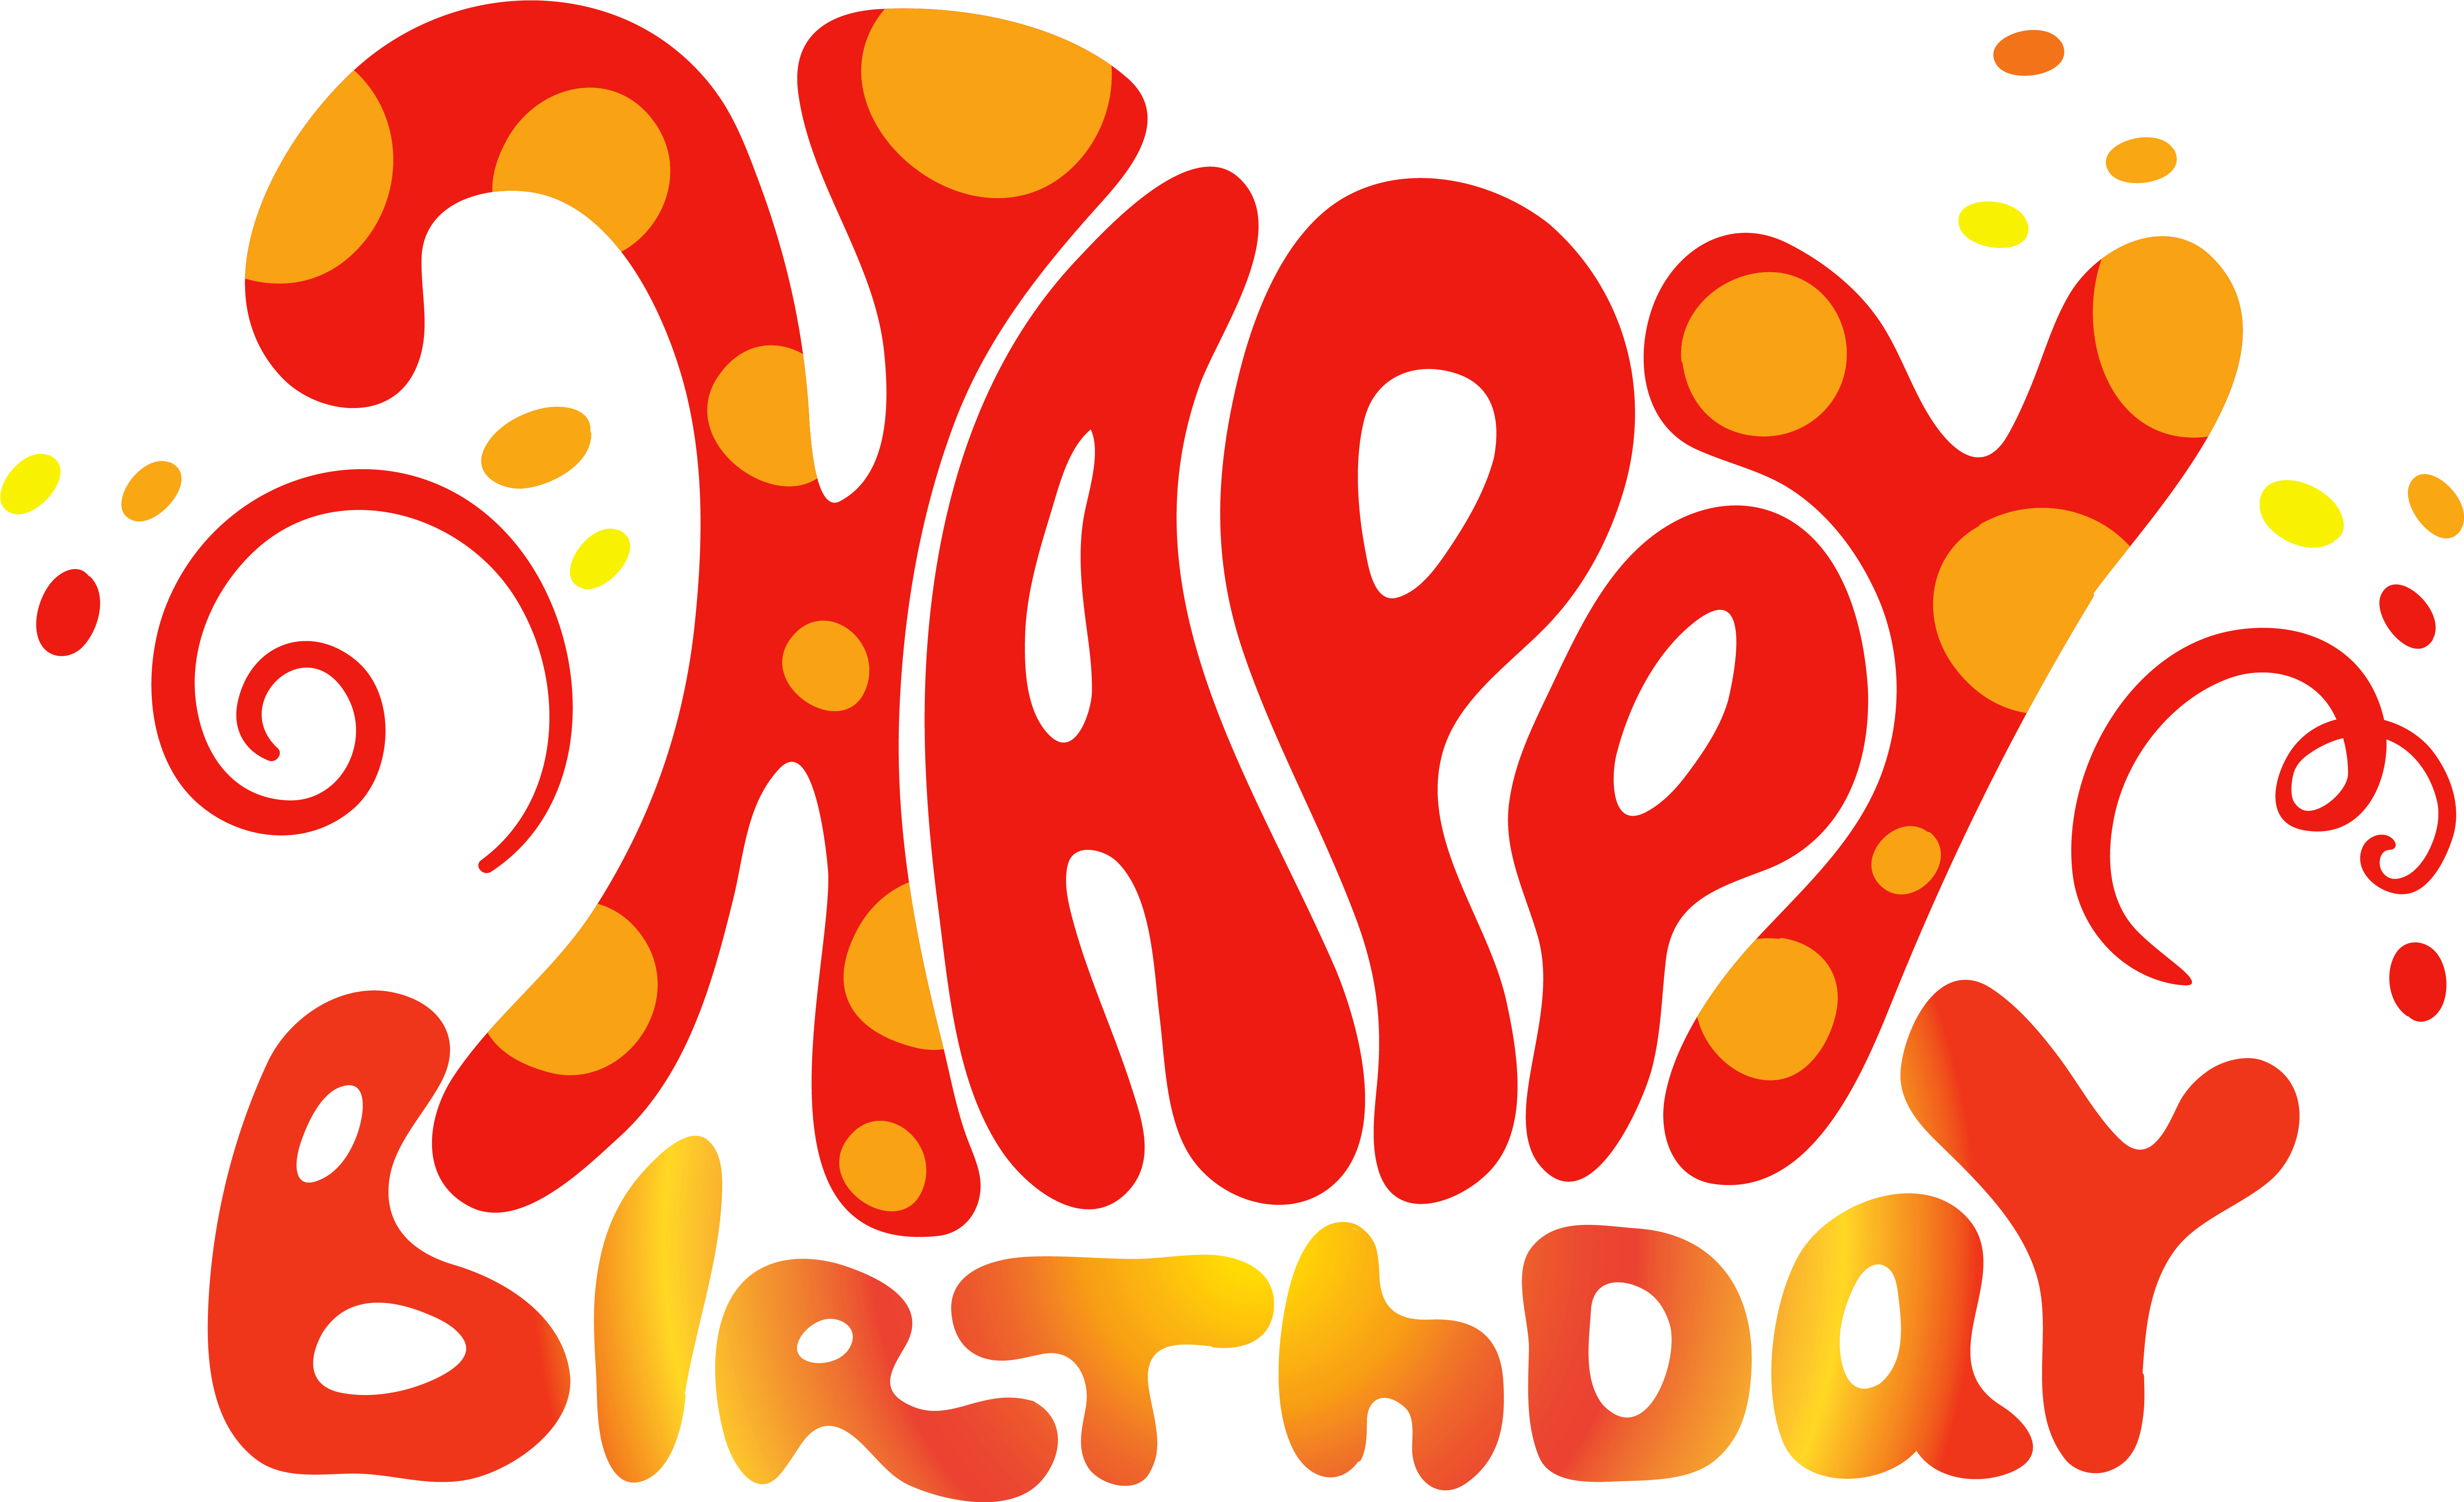 Related Wallpapers - 1 St Happy Birthday (6355x3991)